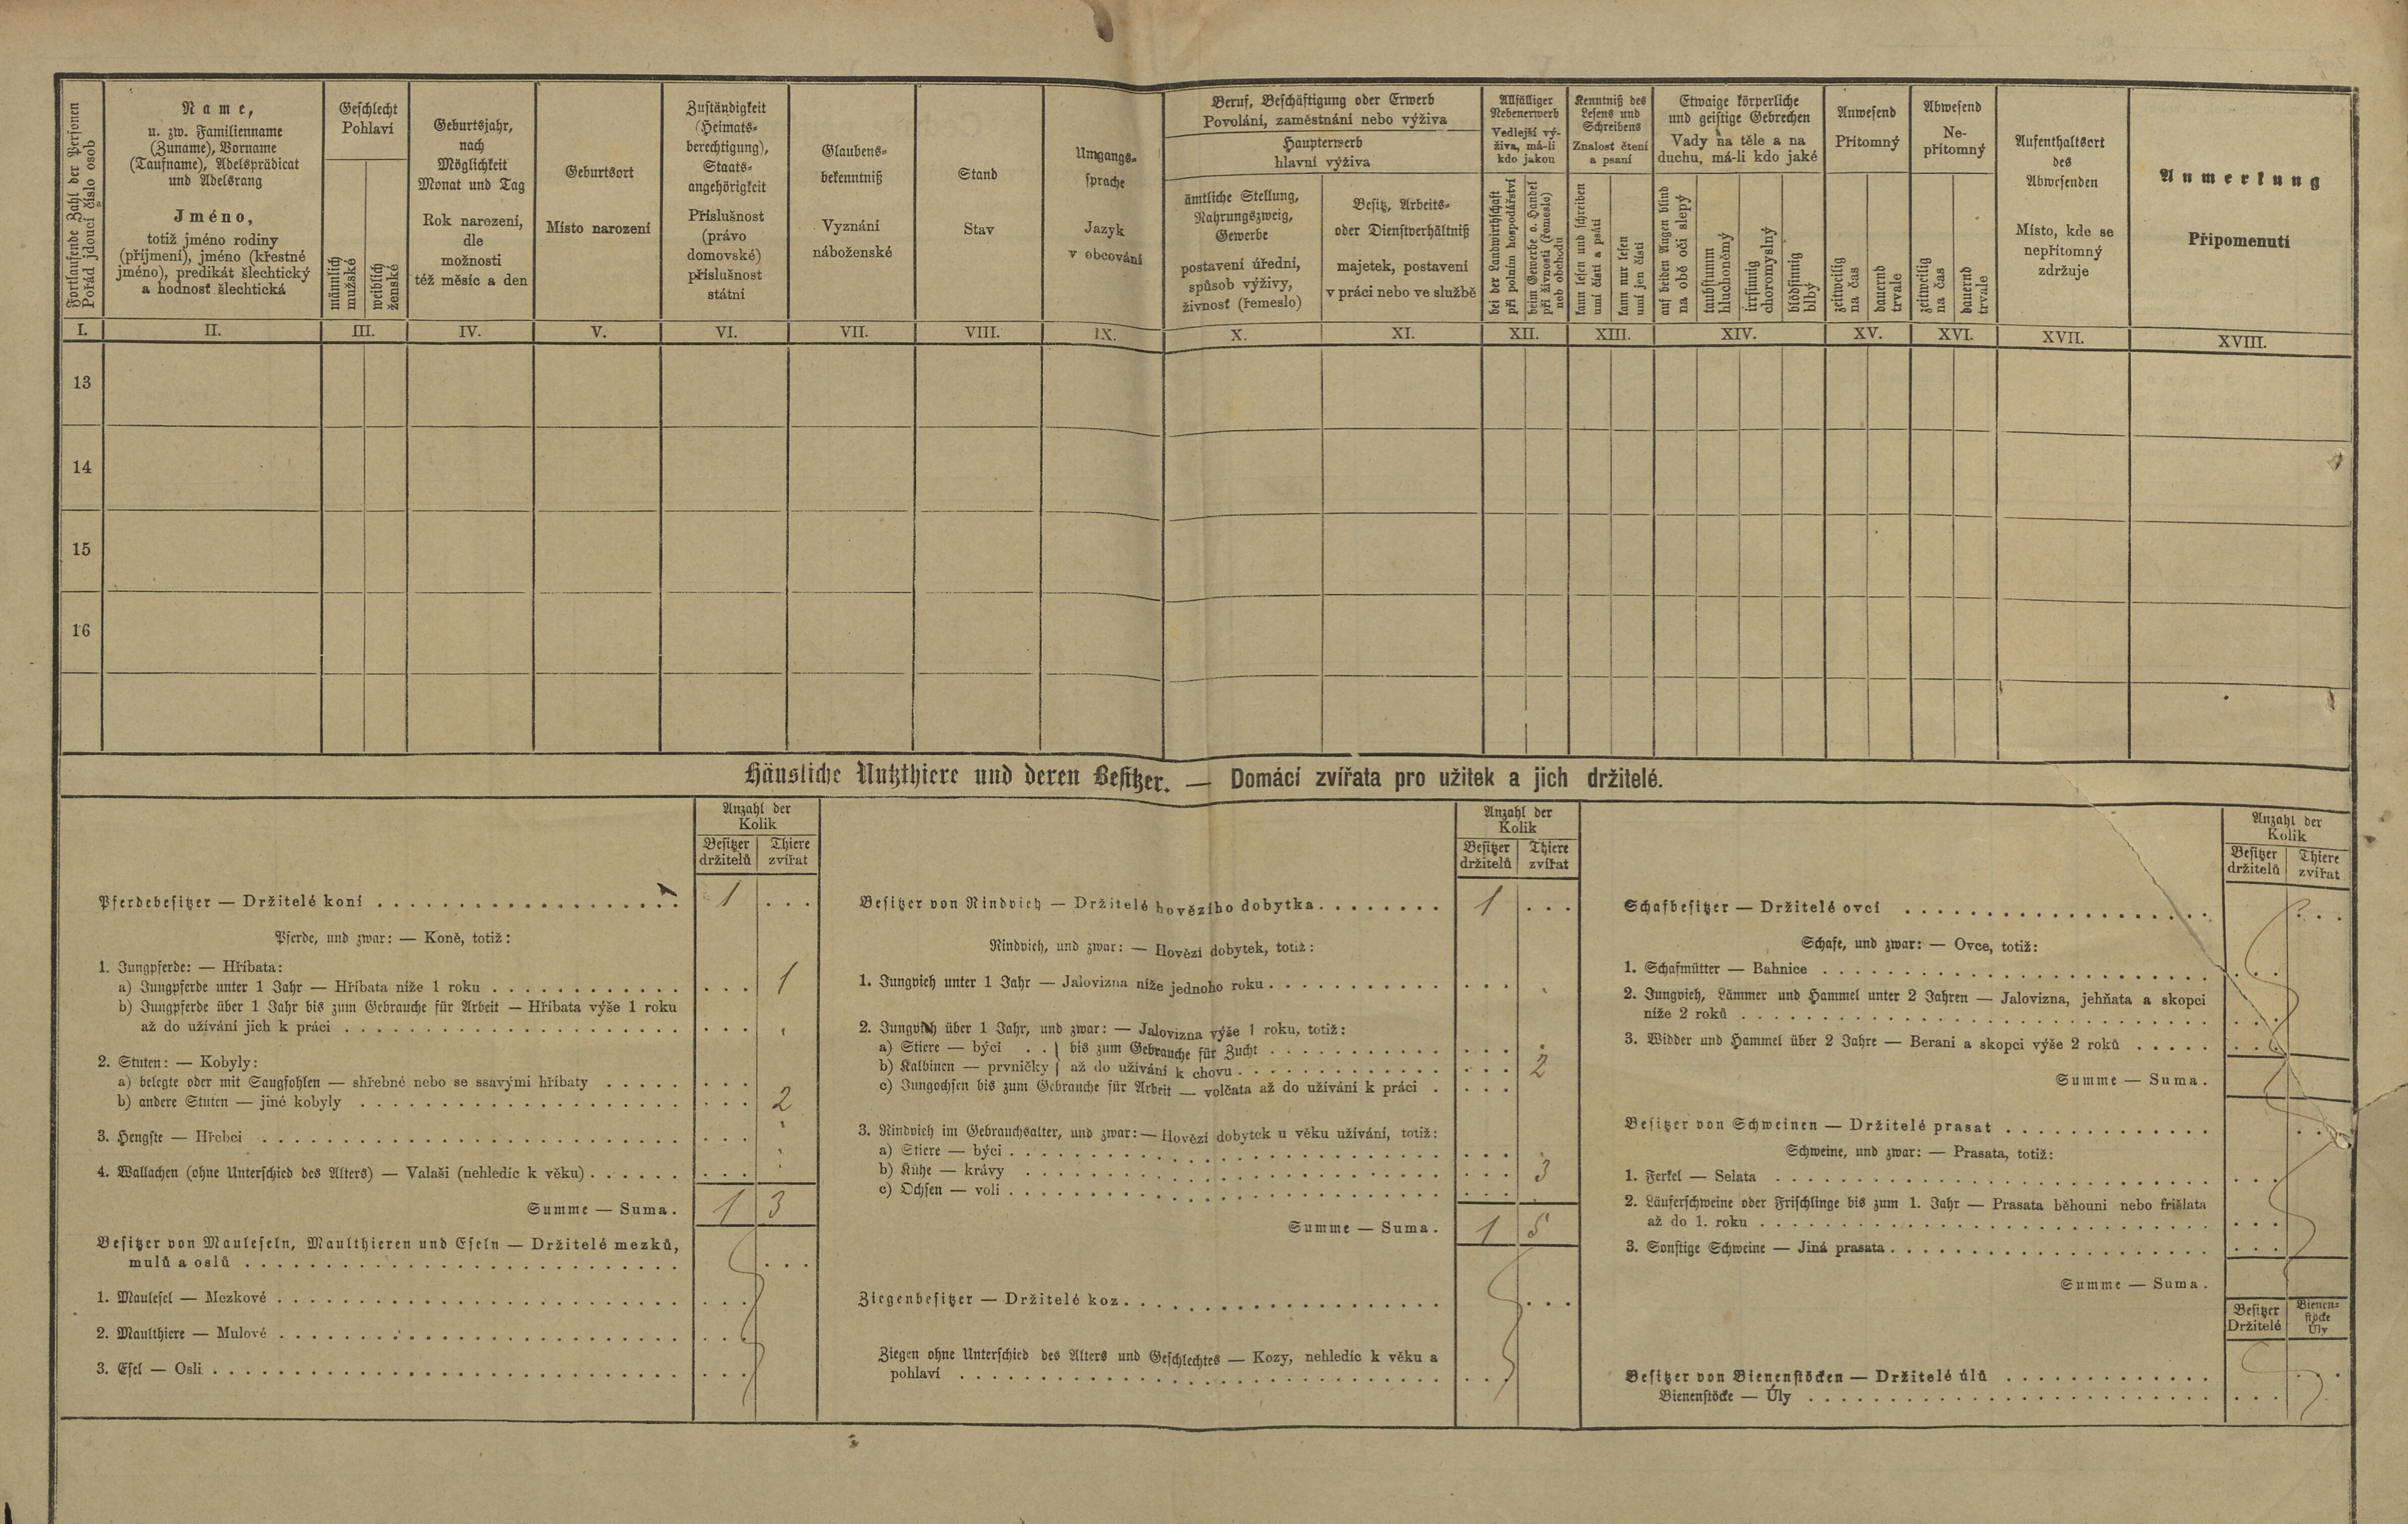 3. soap-pj_00302_census-1880-srby-cp001_0030